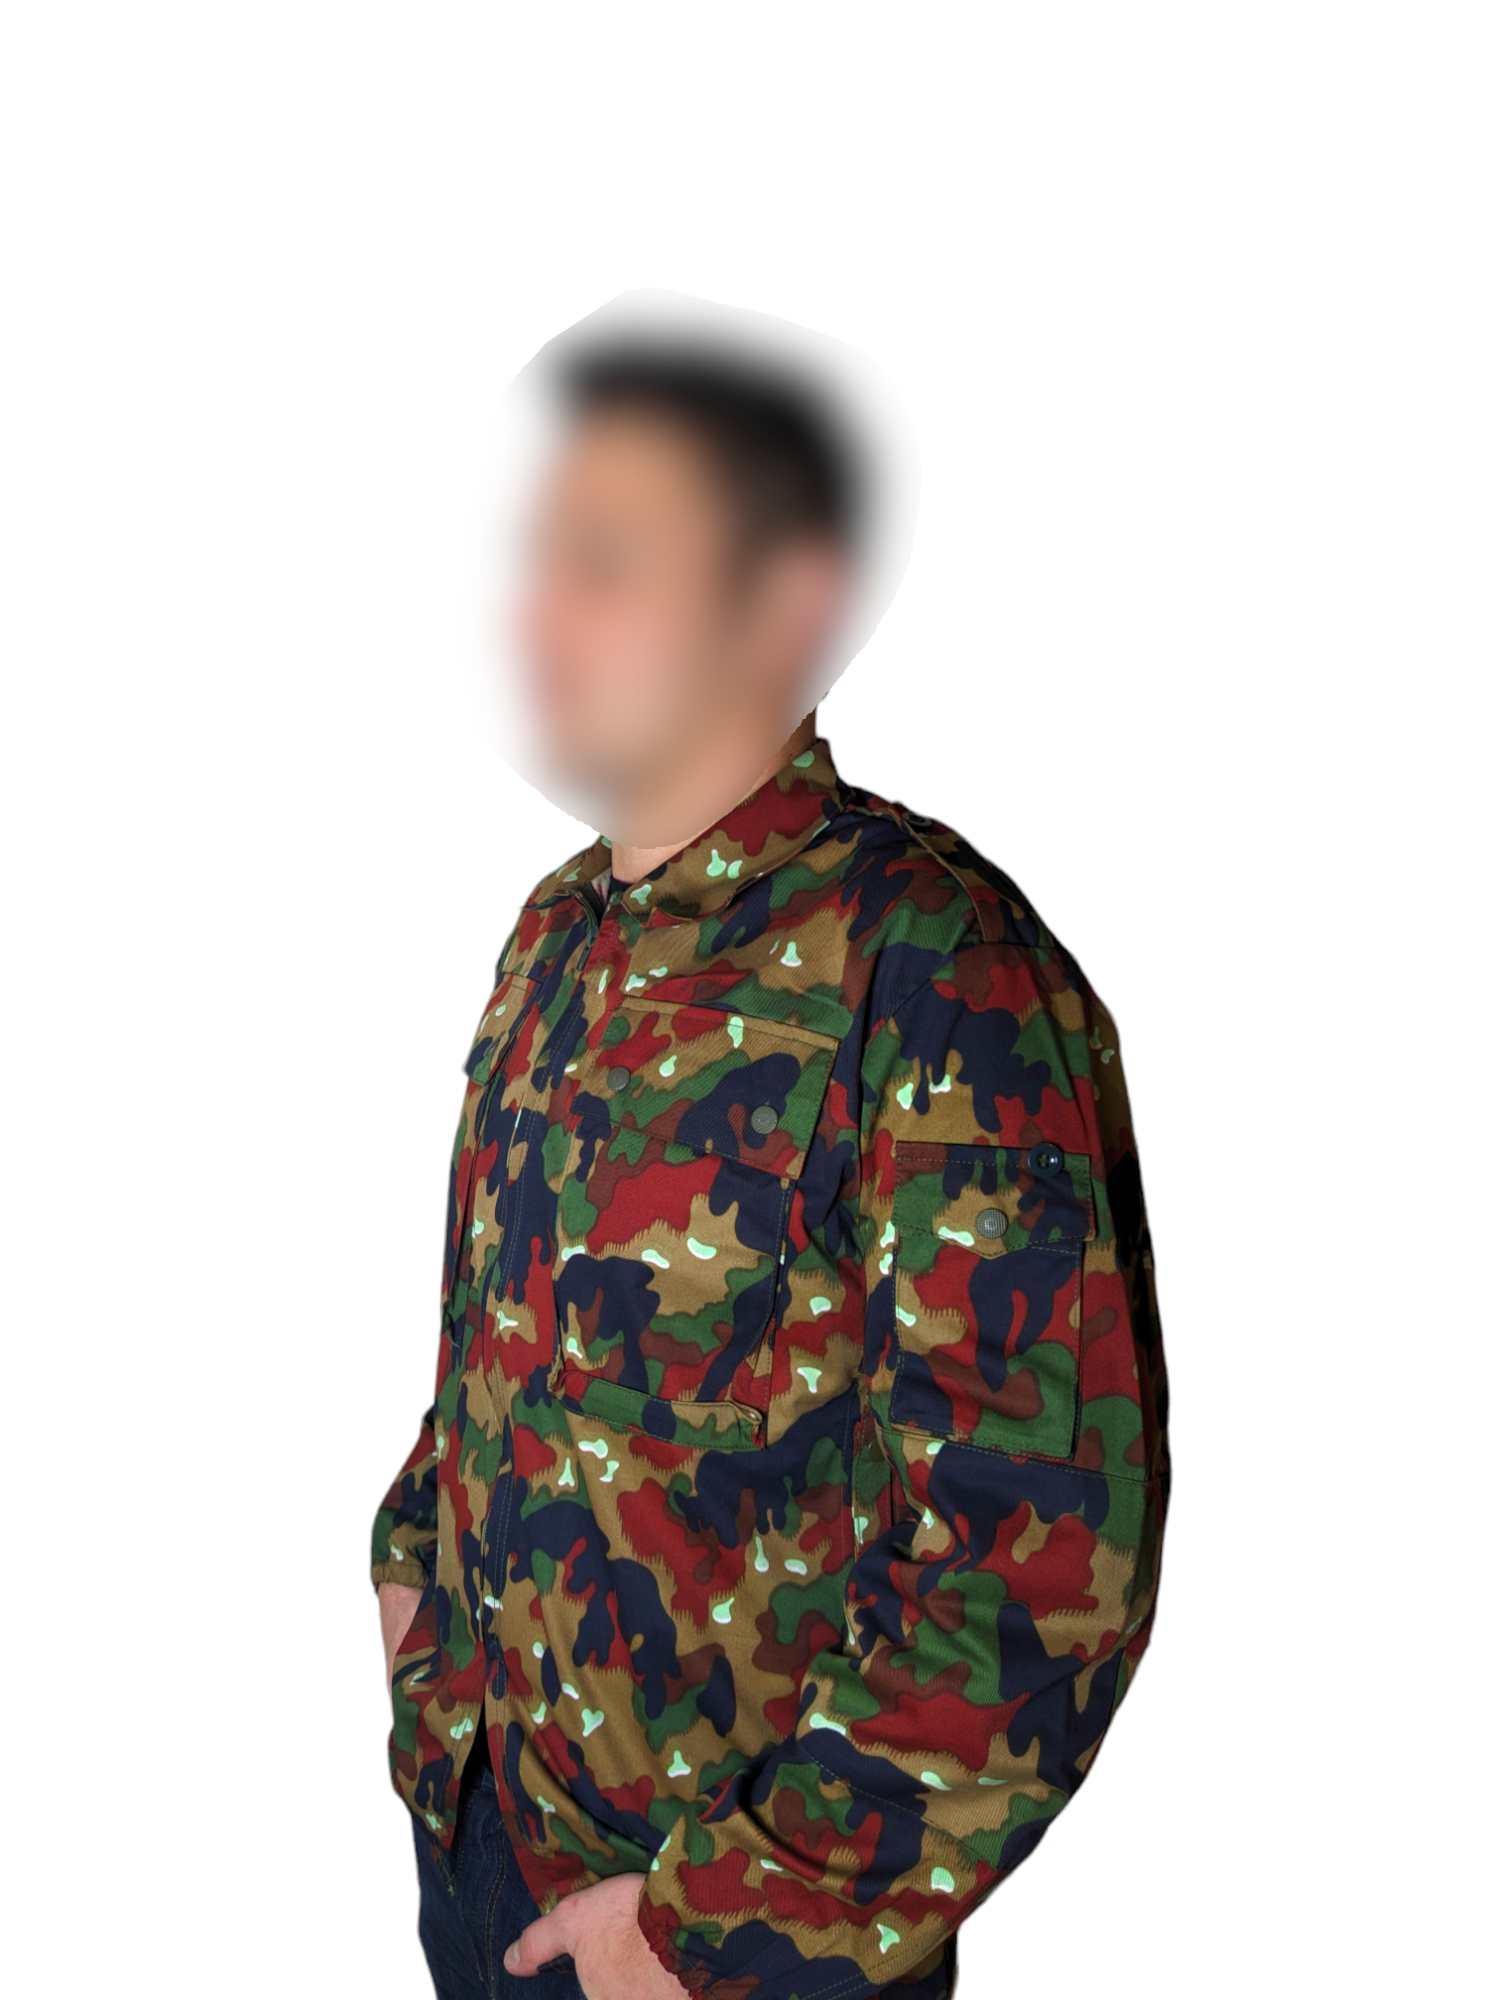 A person wearing a durable Six Gun Surplus Swiss M83 Camo Field Shirt with hands in pockets is standing against a white background. The face is blurred, making the person unidentifiable. The functional jacket features a combination of green, brown, and beige patterns.